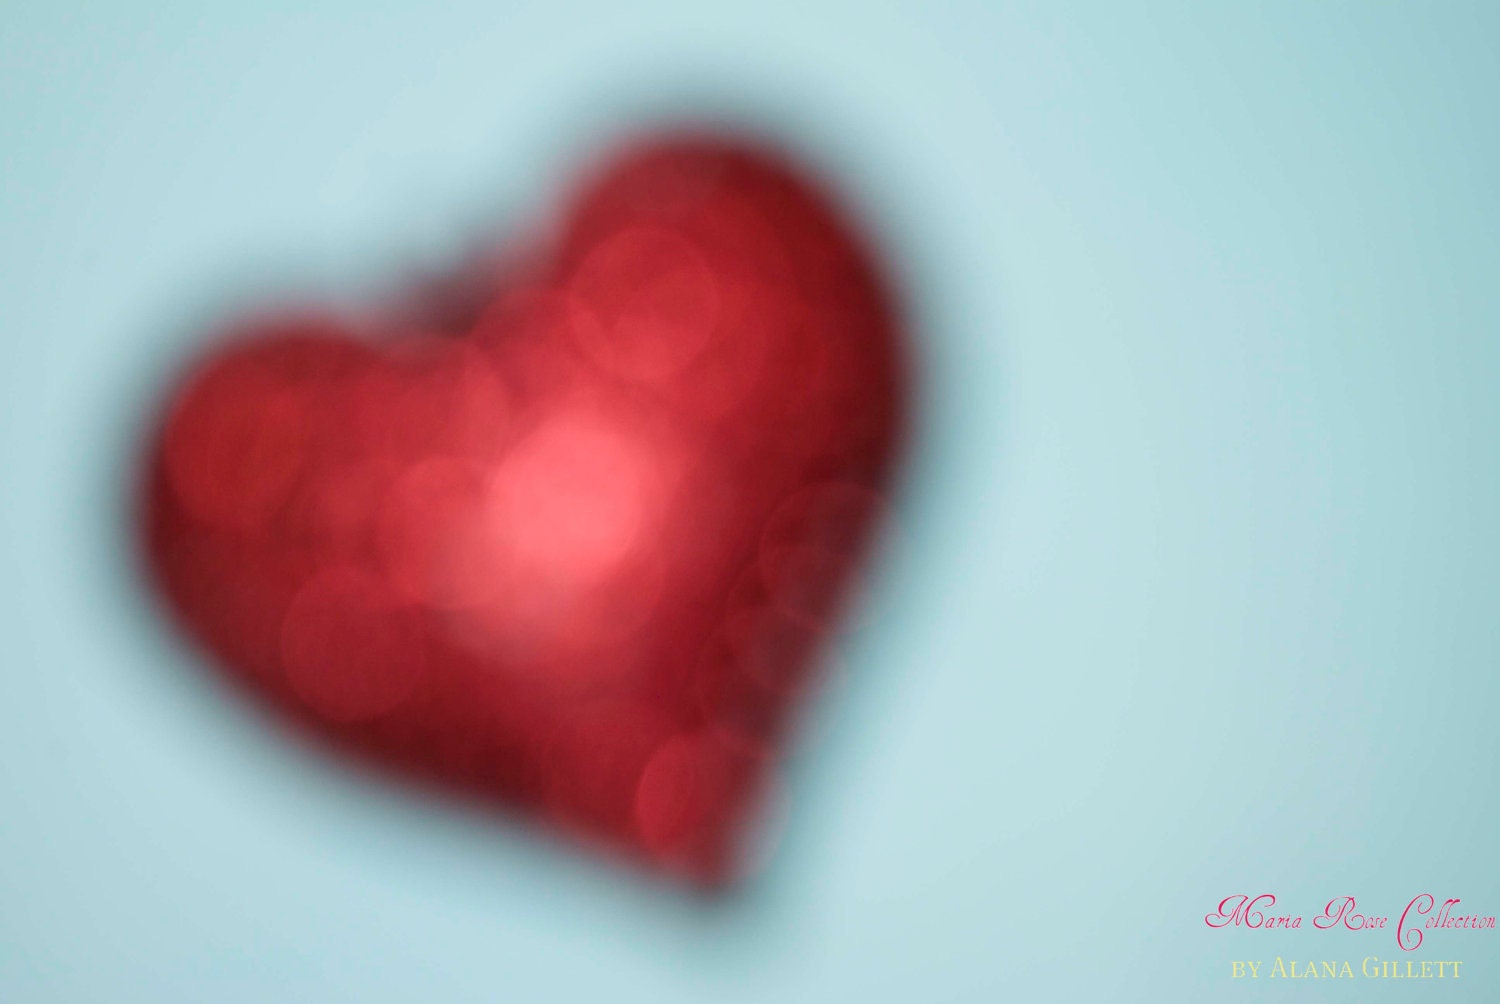 Soft Heart- Fine Art Photography print 5x7 by Alana Gillett- Ruby Red Aquamarine Teal Baby Blue Bokeh Dreamy Valentine's Day Love Wall Art - MariaRoseCollection